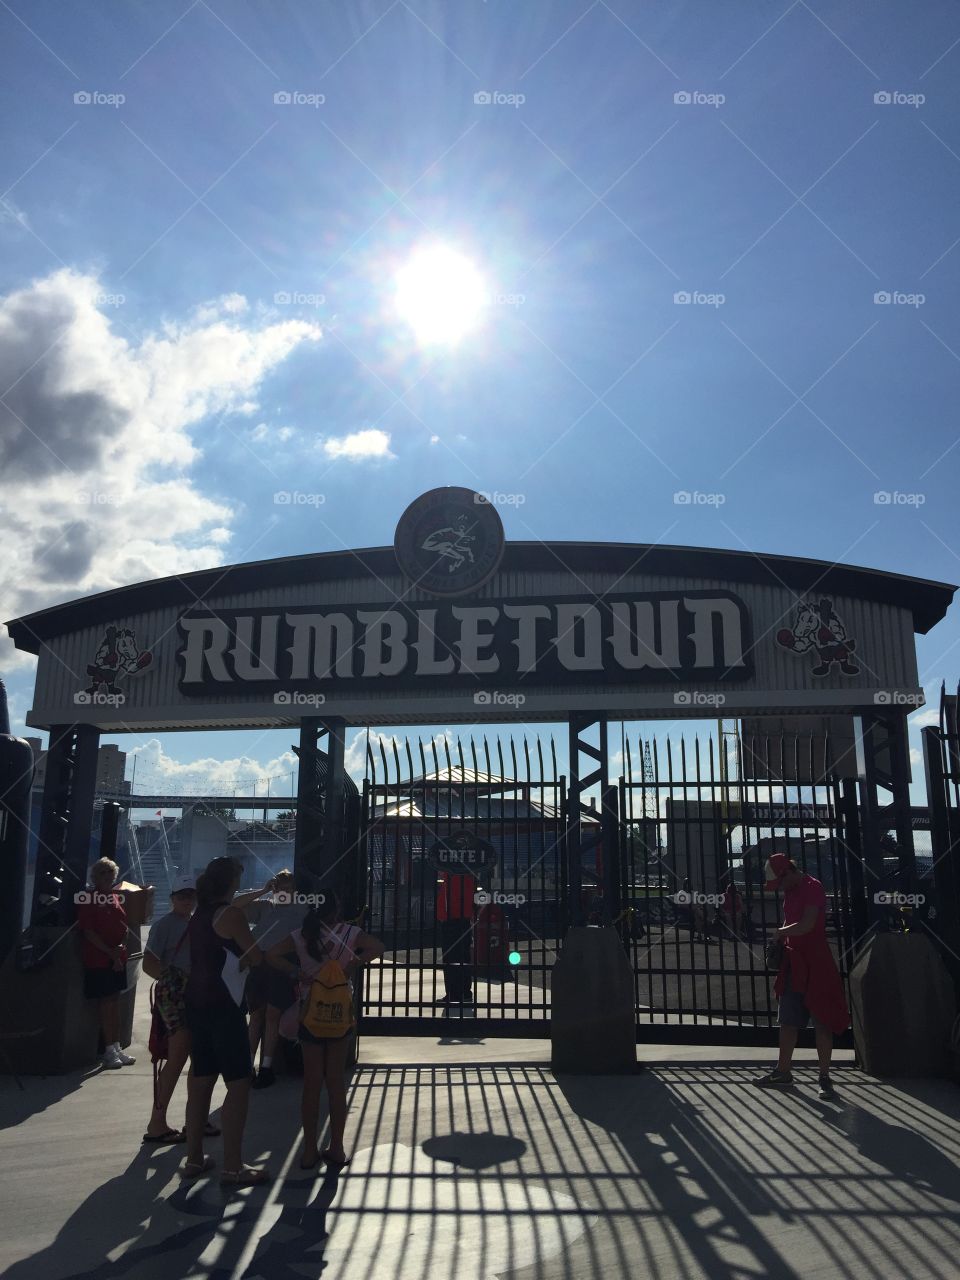 Yes love rumbletown that’s where the magic of baseball is let’s rumble